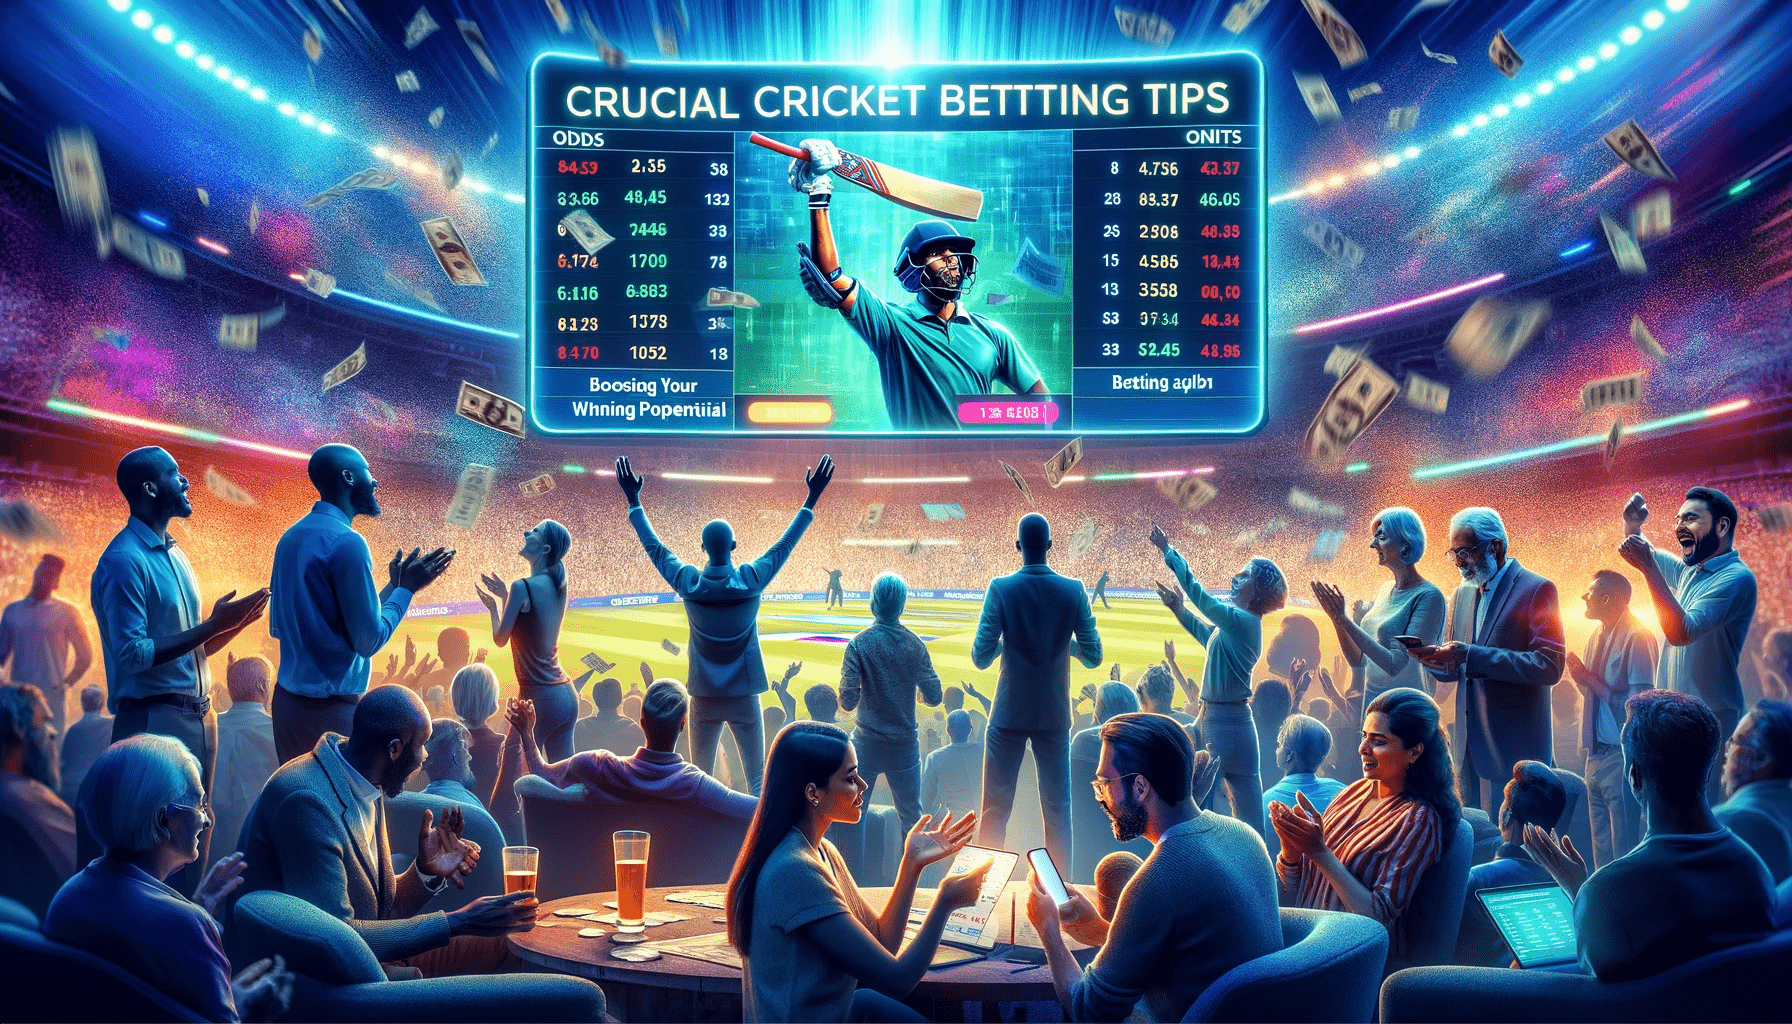 Crucial Cricket Betting Tips: Boosting Your Winning Potential